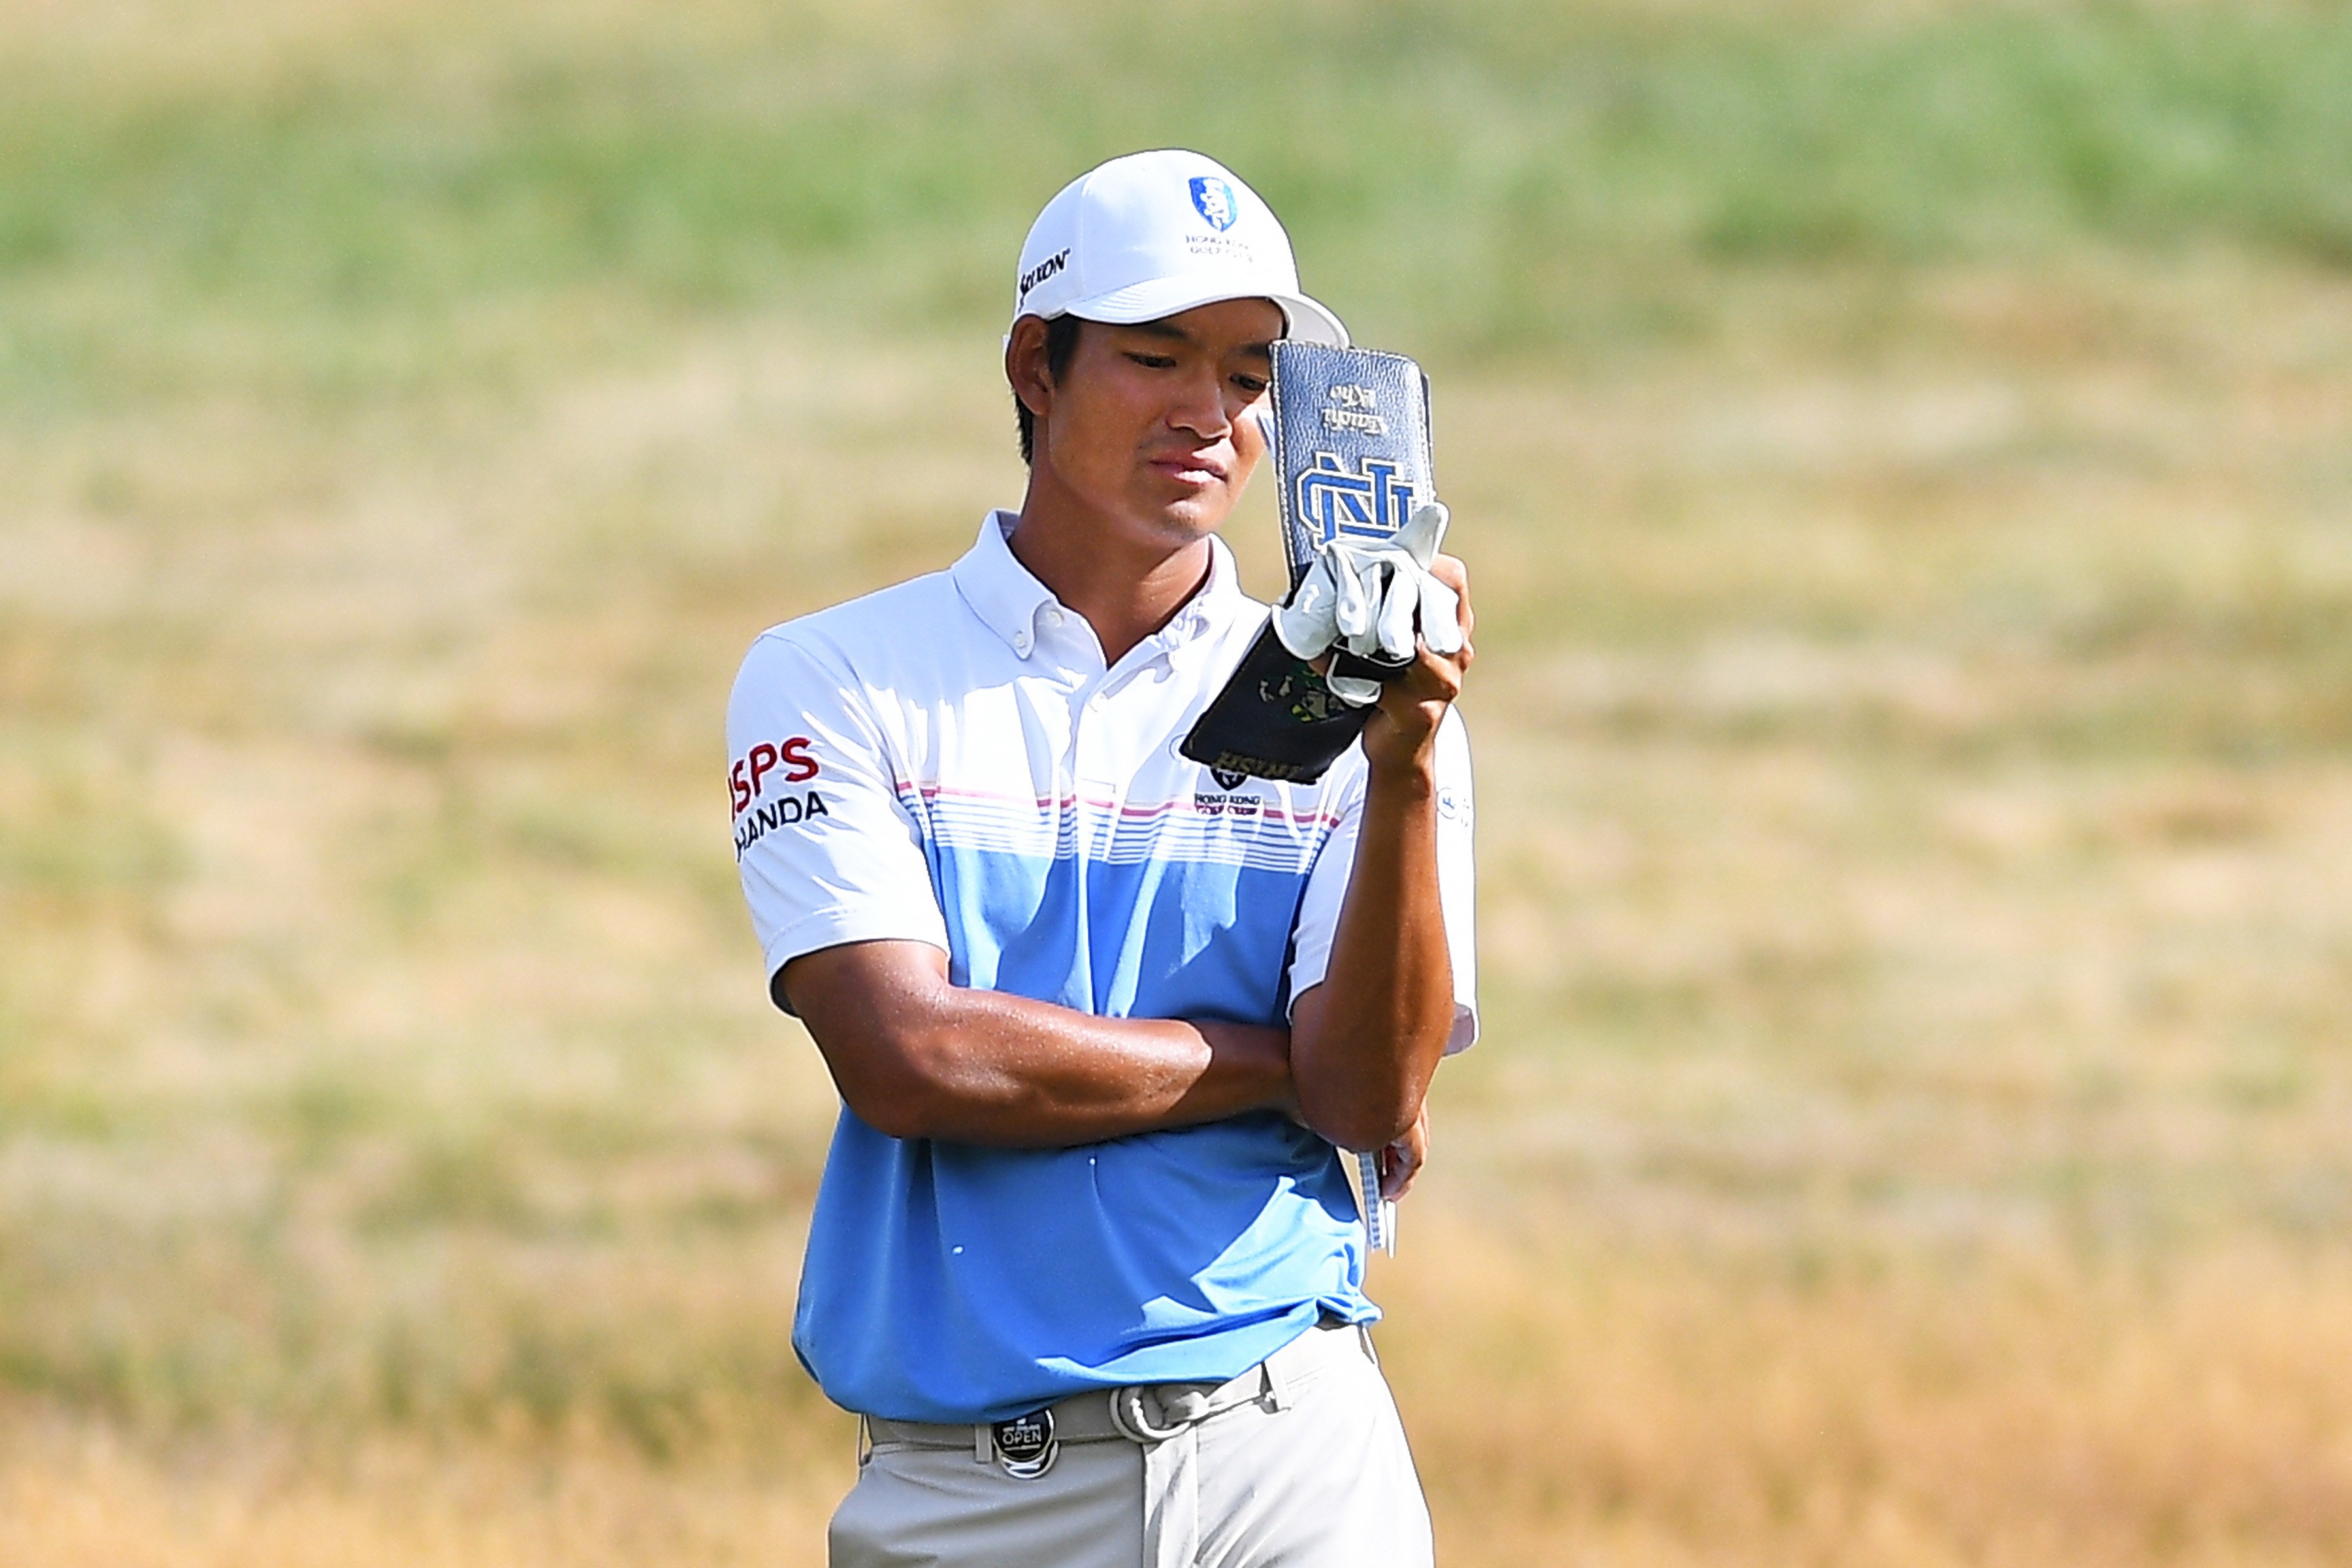 Taichi Kho studies his yardage book during the third round of the New Zealand Open. Photo: Asian Tour